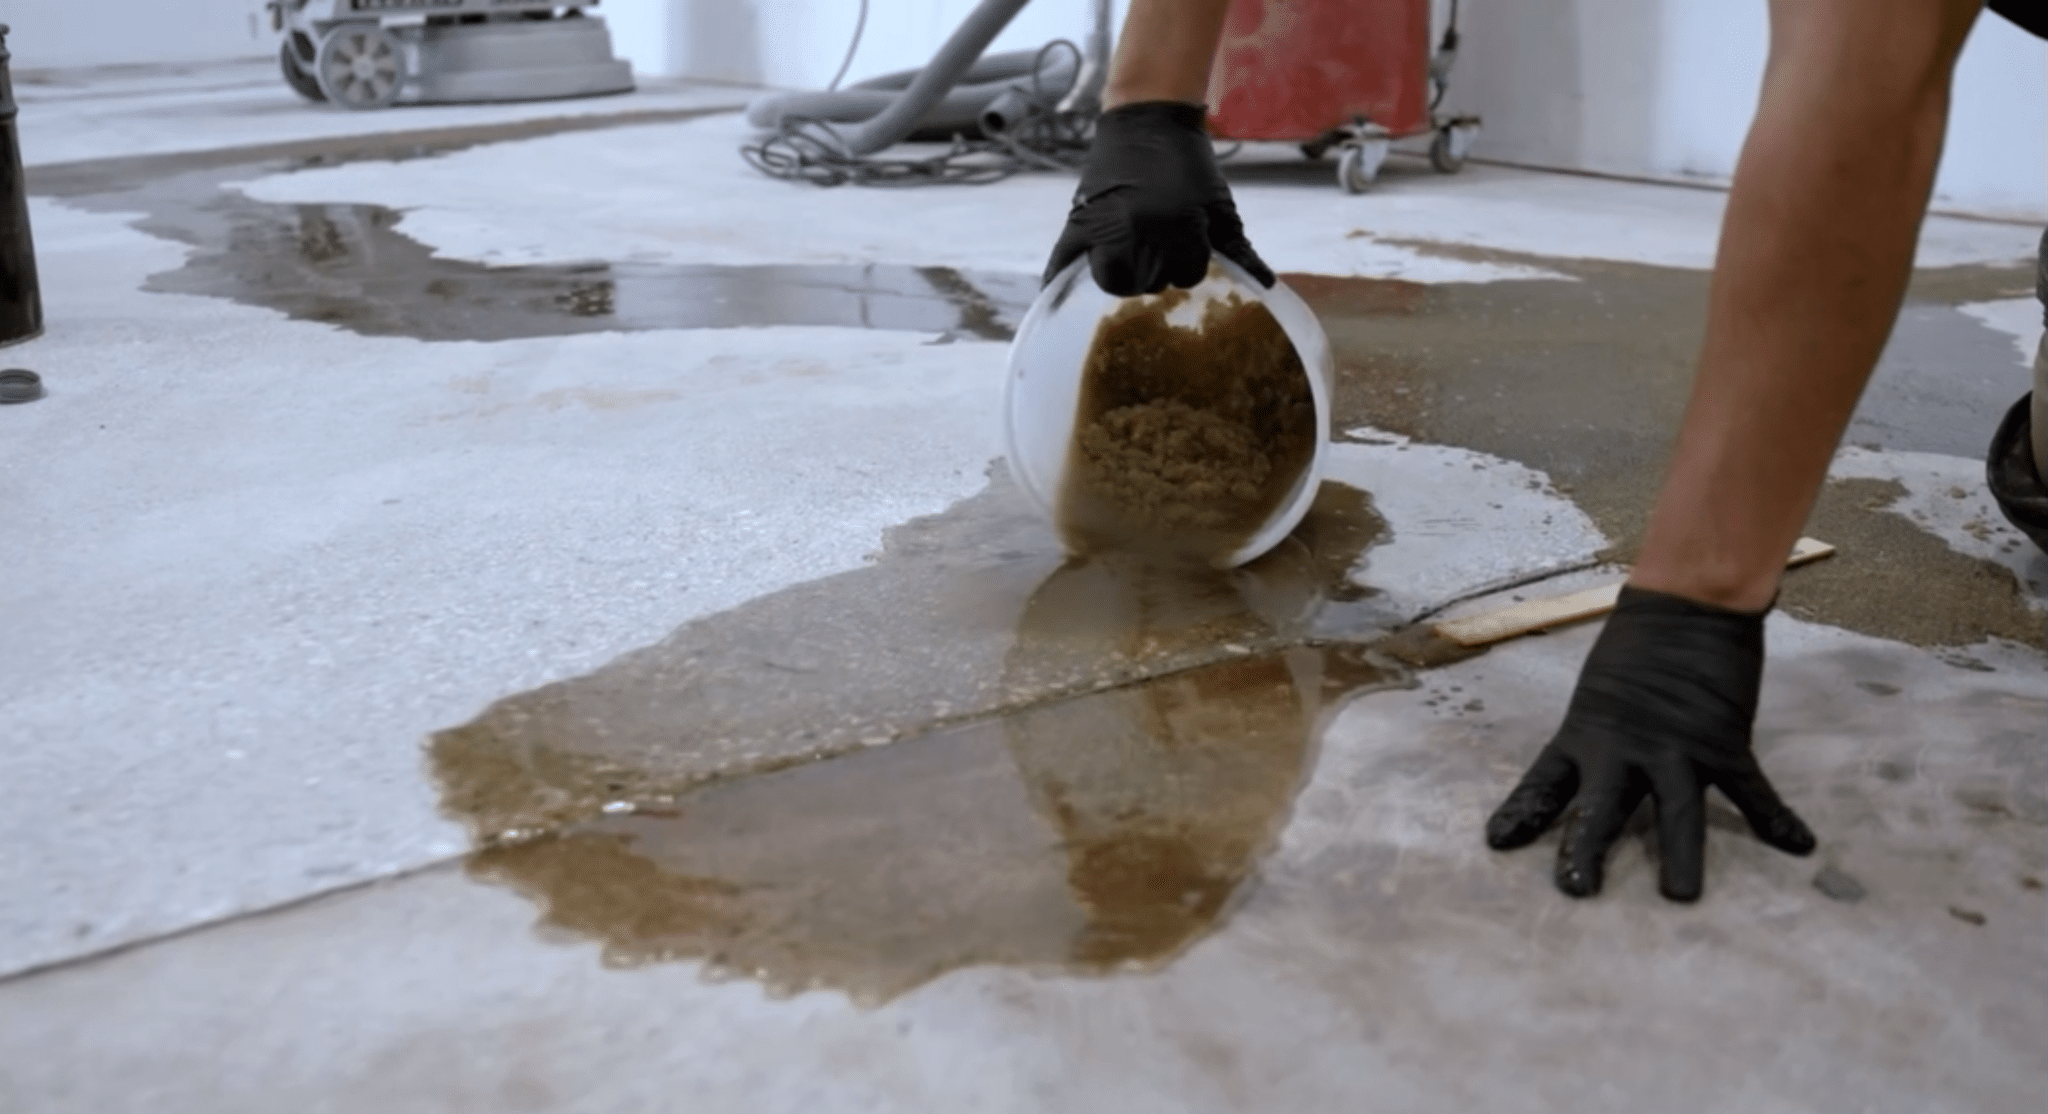 A person in gloves is pouring a substance onto a wet concrete floor, likely performing some type of construction or renovation work.